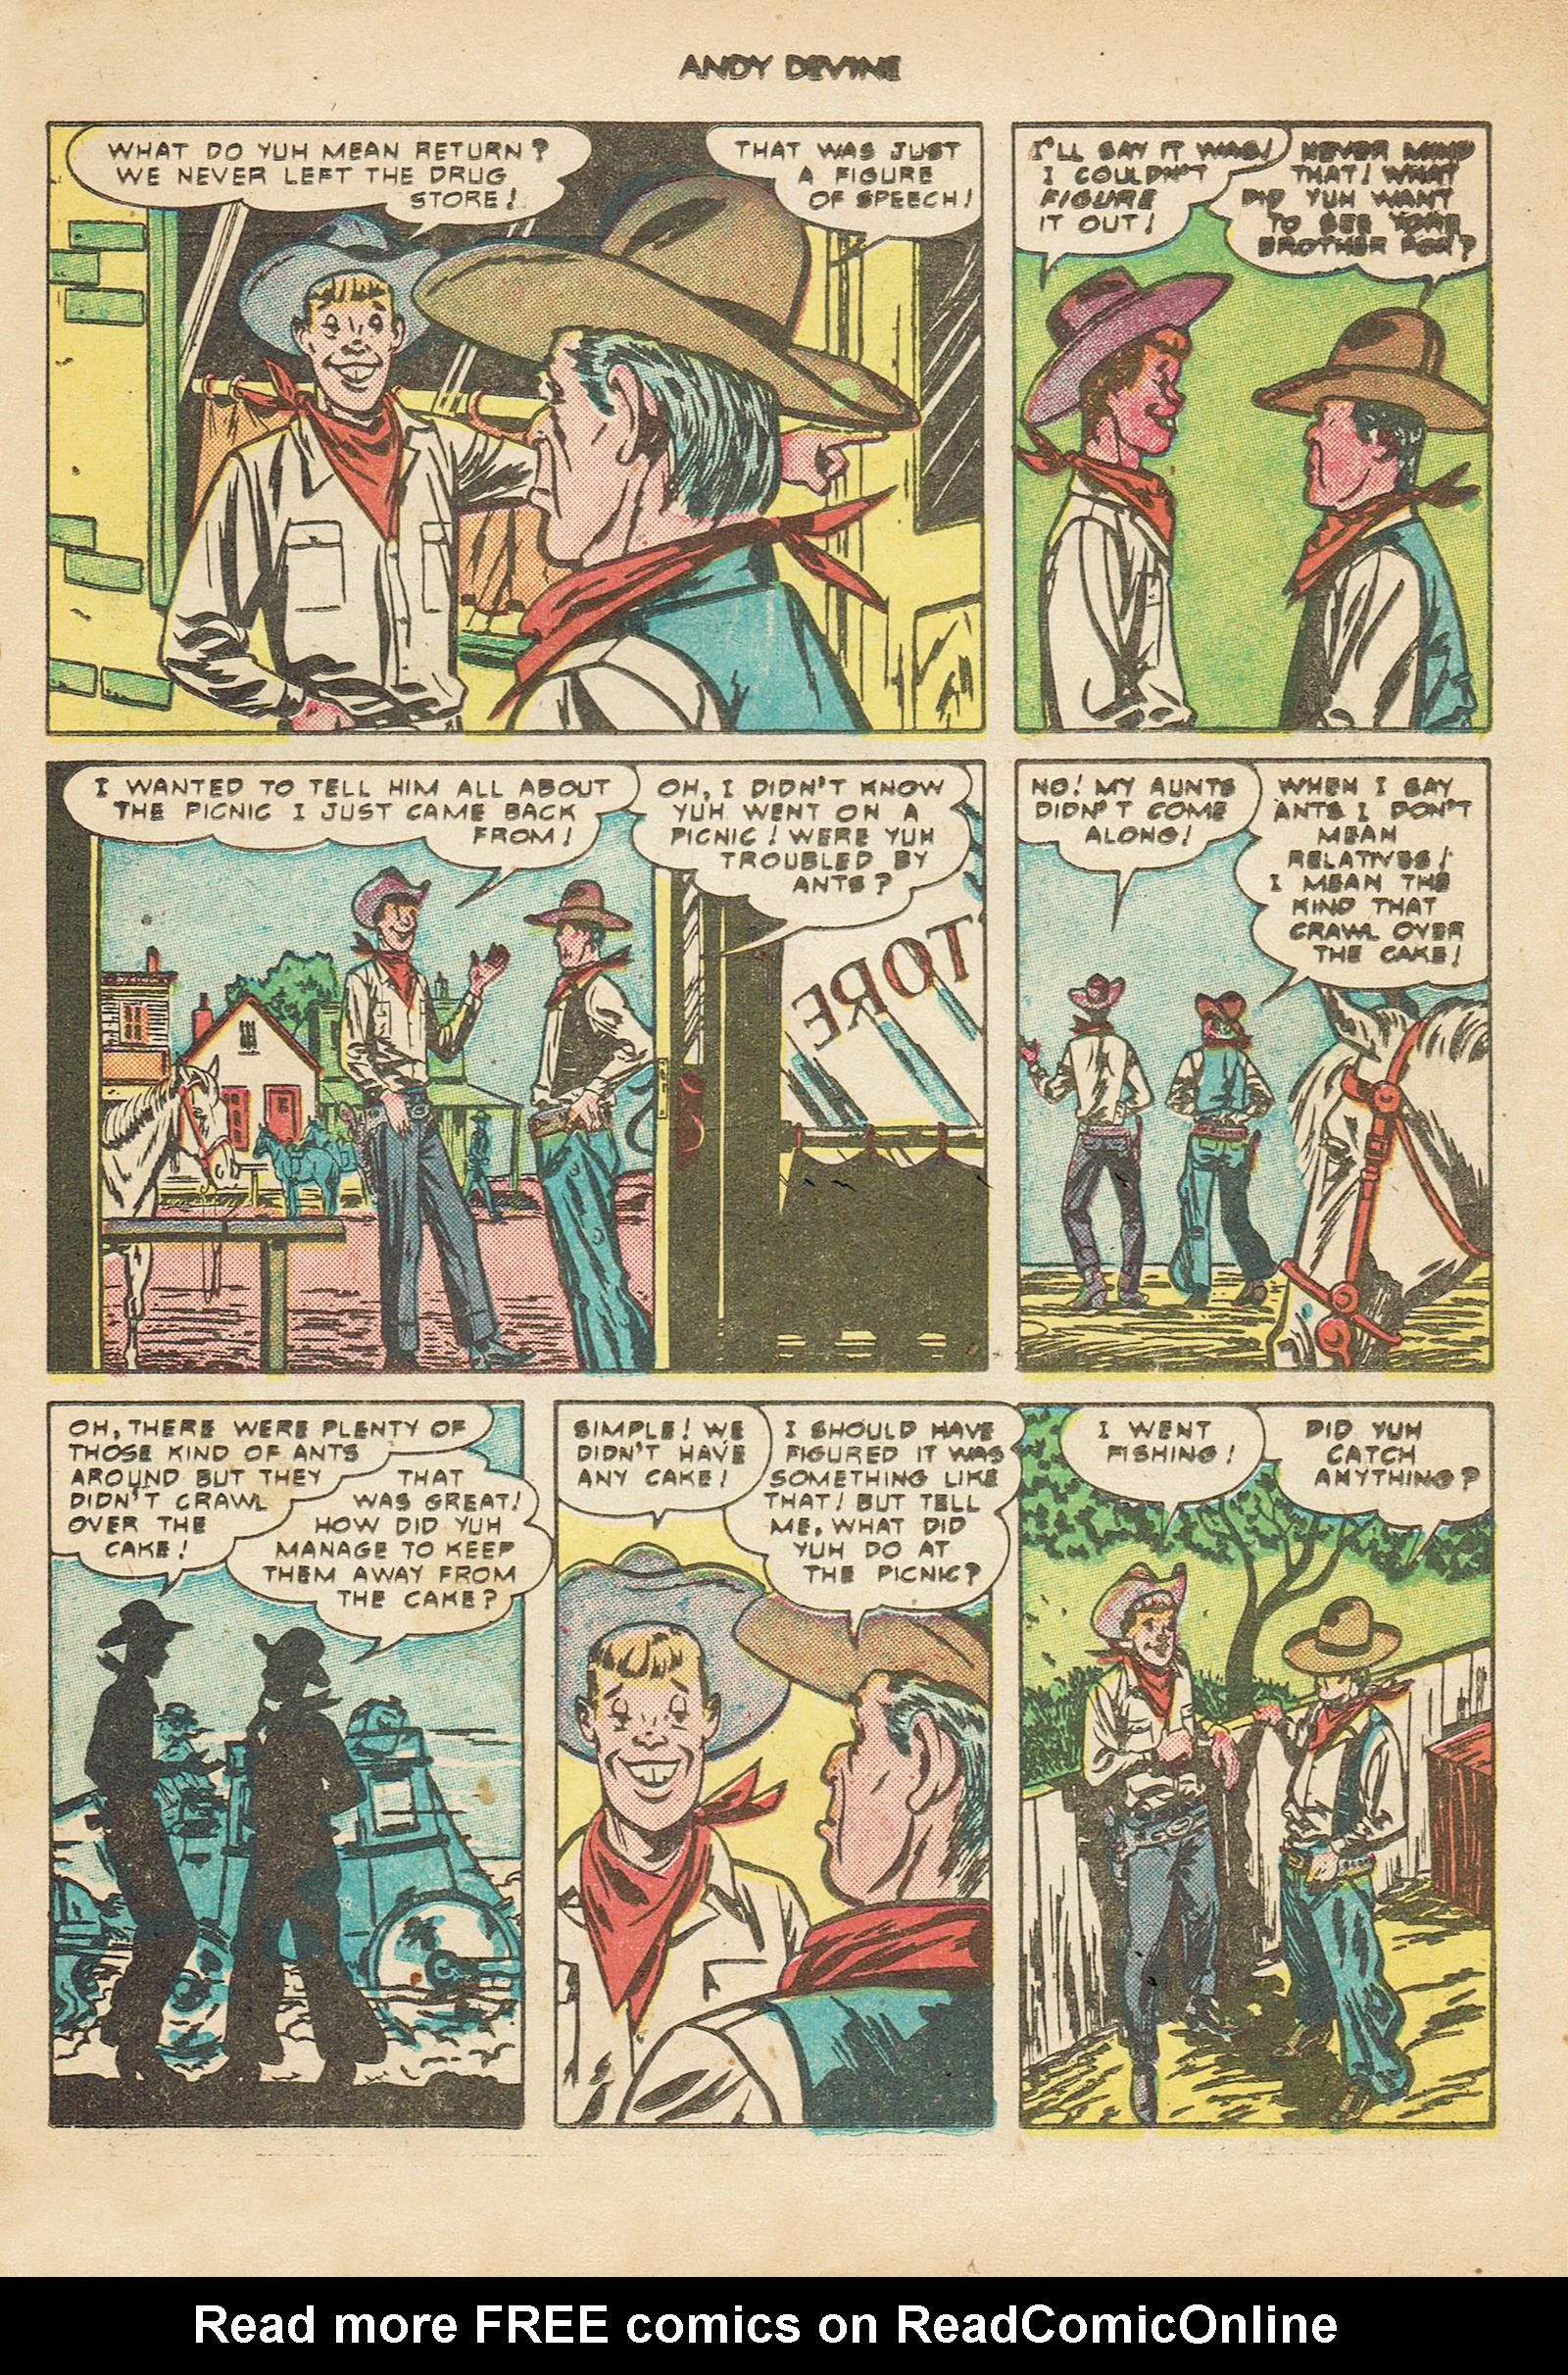 Read online Andy Devine Western comic -  Issue #2 - 15